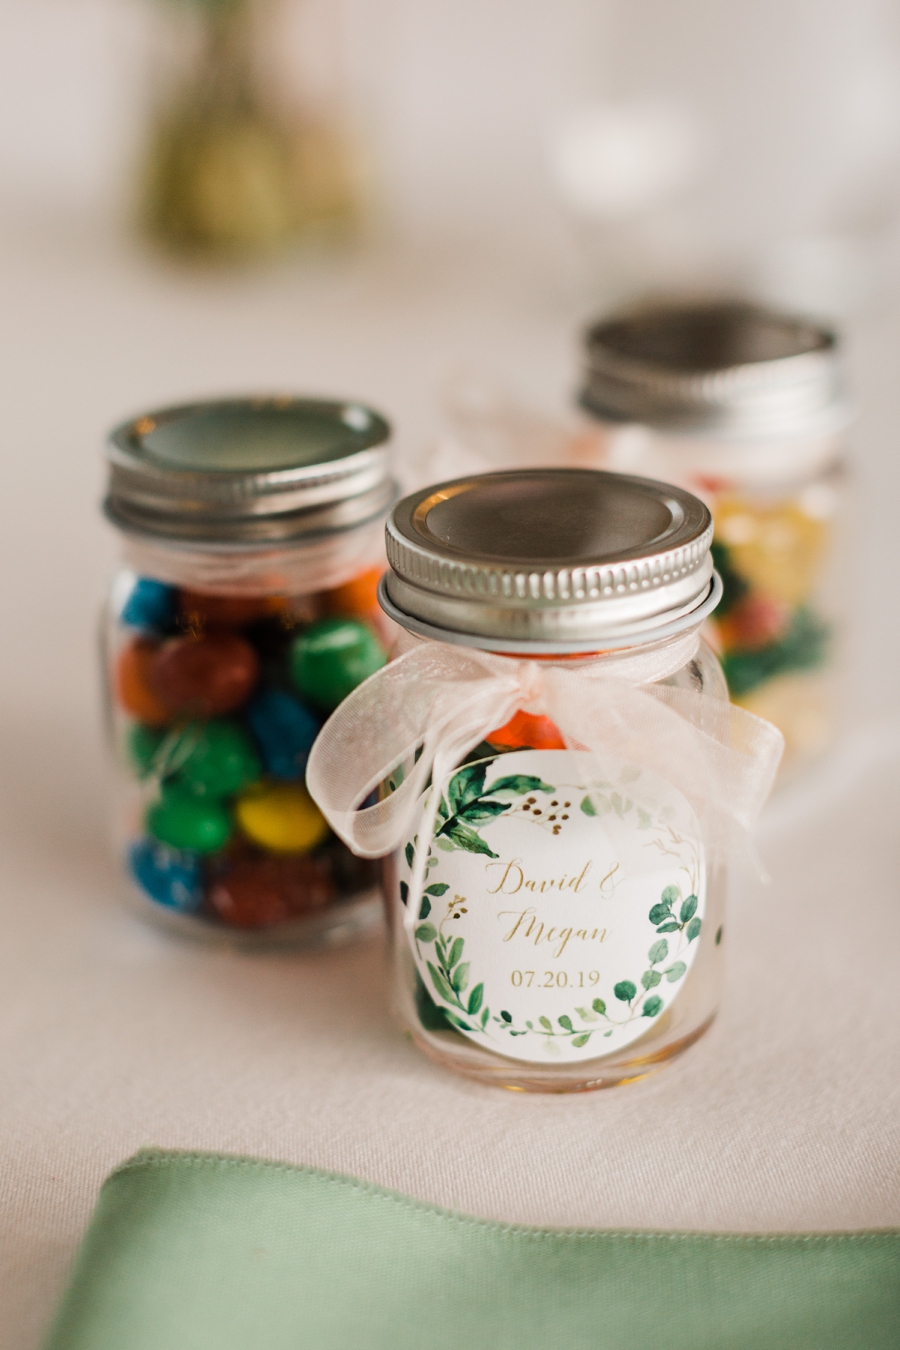 Edible wedding favors served in glass jars photographed by outdoor wedding photographer Amy Galbraith